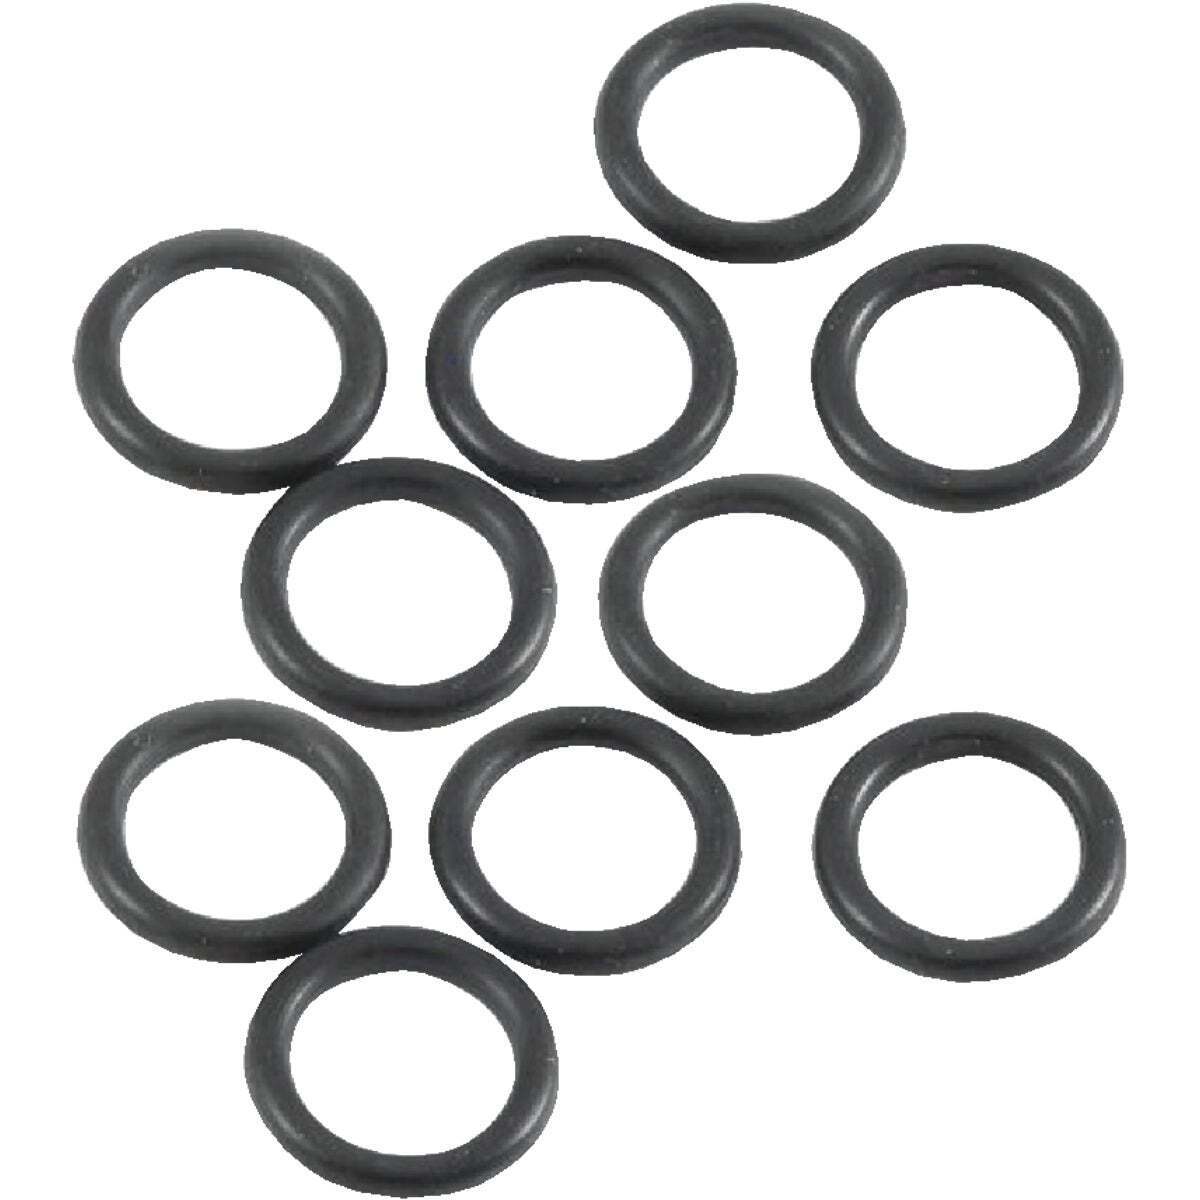 Picture of Forney Industries 75191 0.25 in. Quick Coupler Pressure Washer O-Ring - 10 Piece